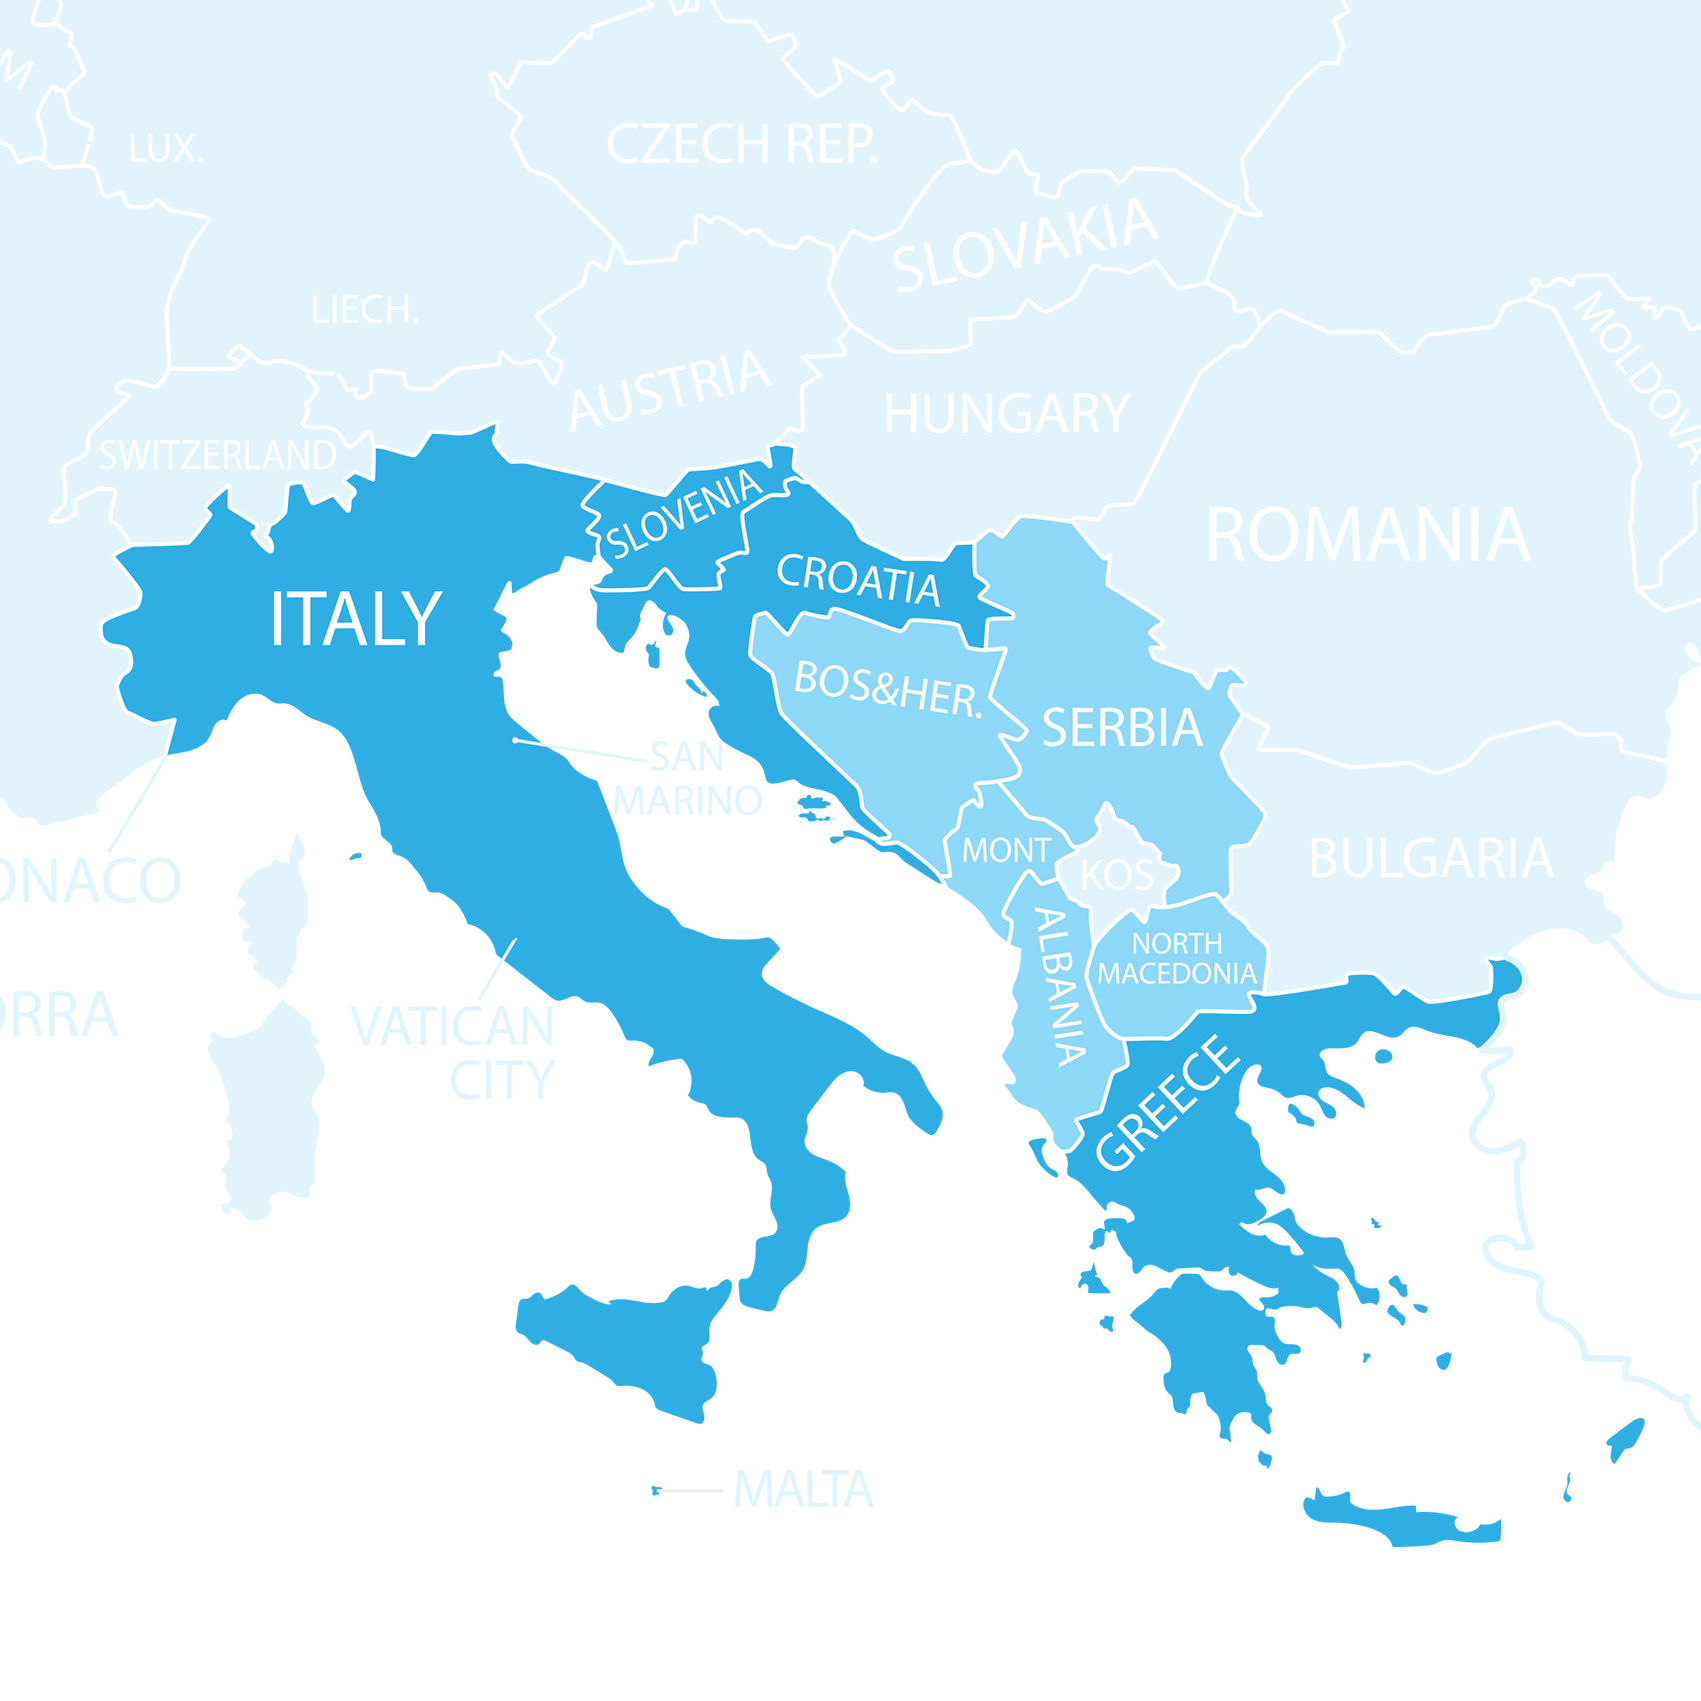 The EU strategy for the Adriatic and Ionian Region